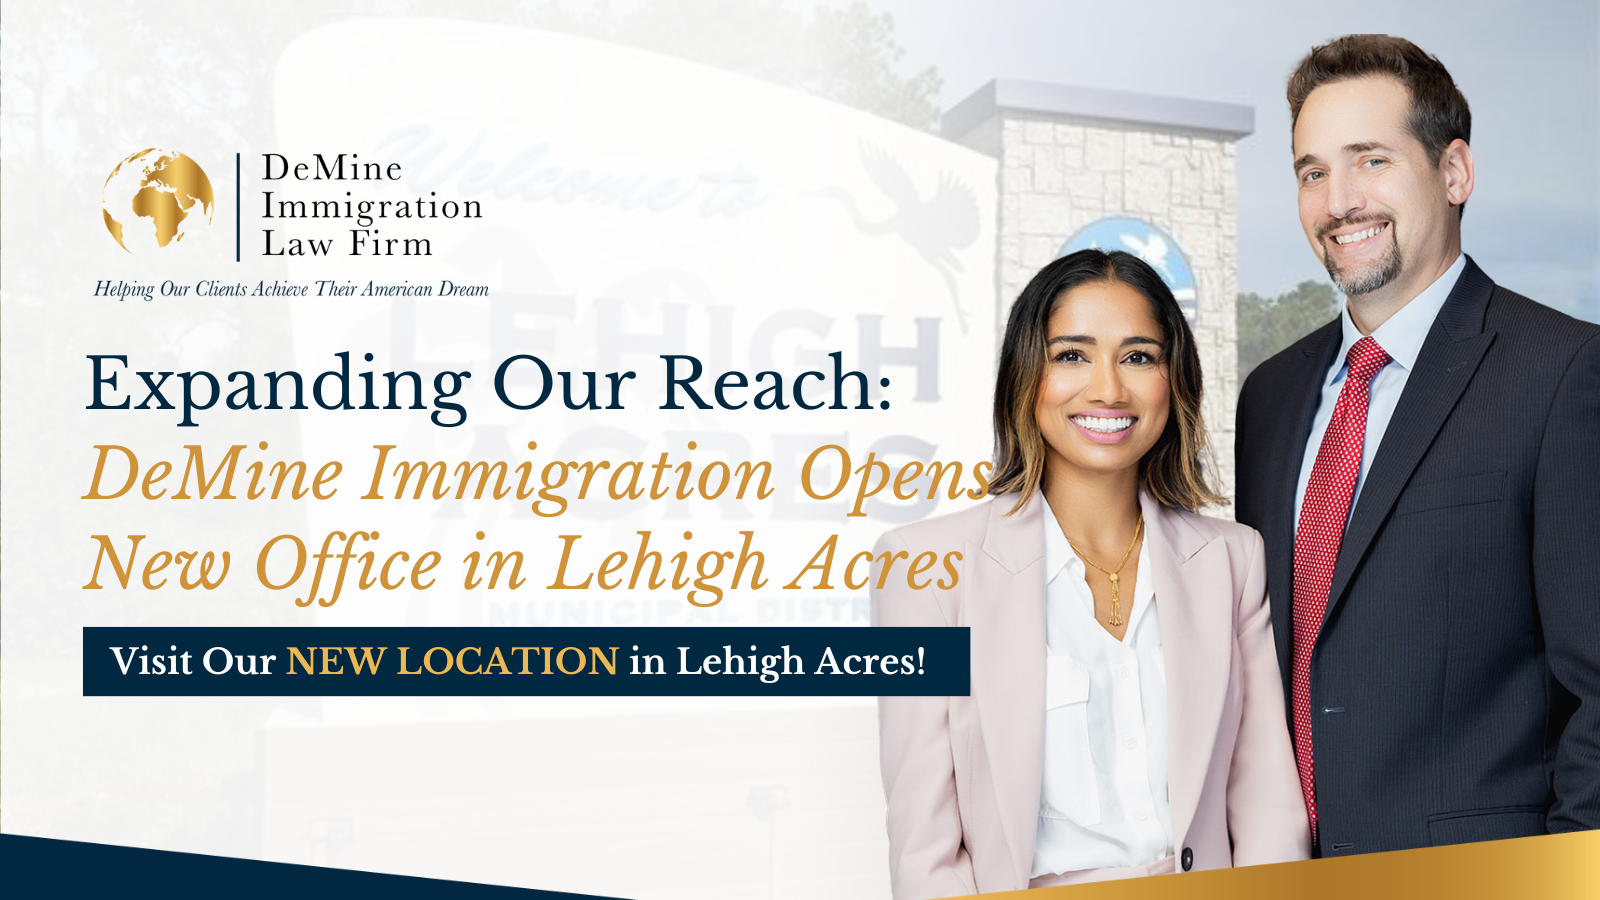 Expanding Our Reach: DeMine Immigration Opens New Office in Lehigh Acres, Florida!